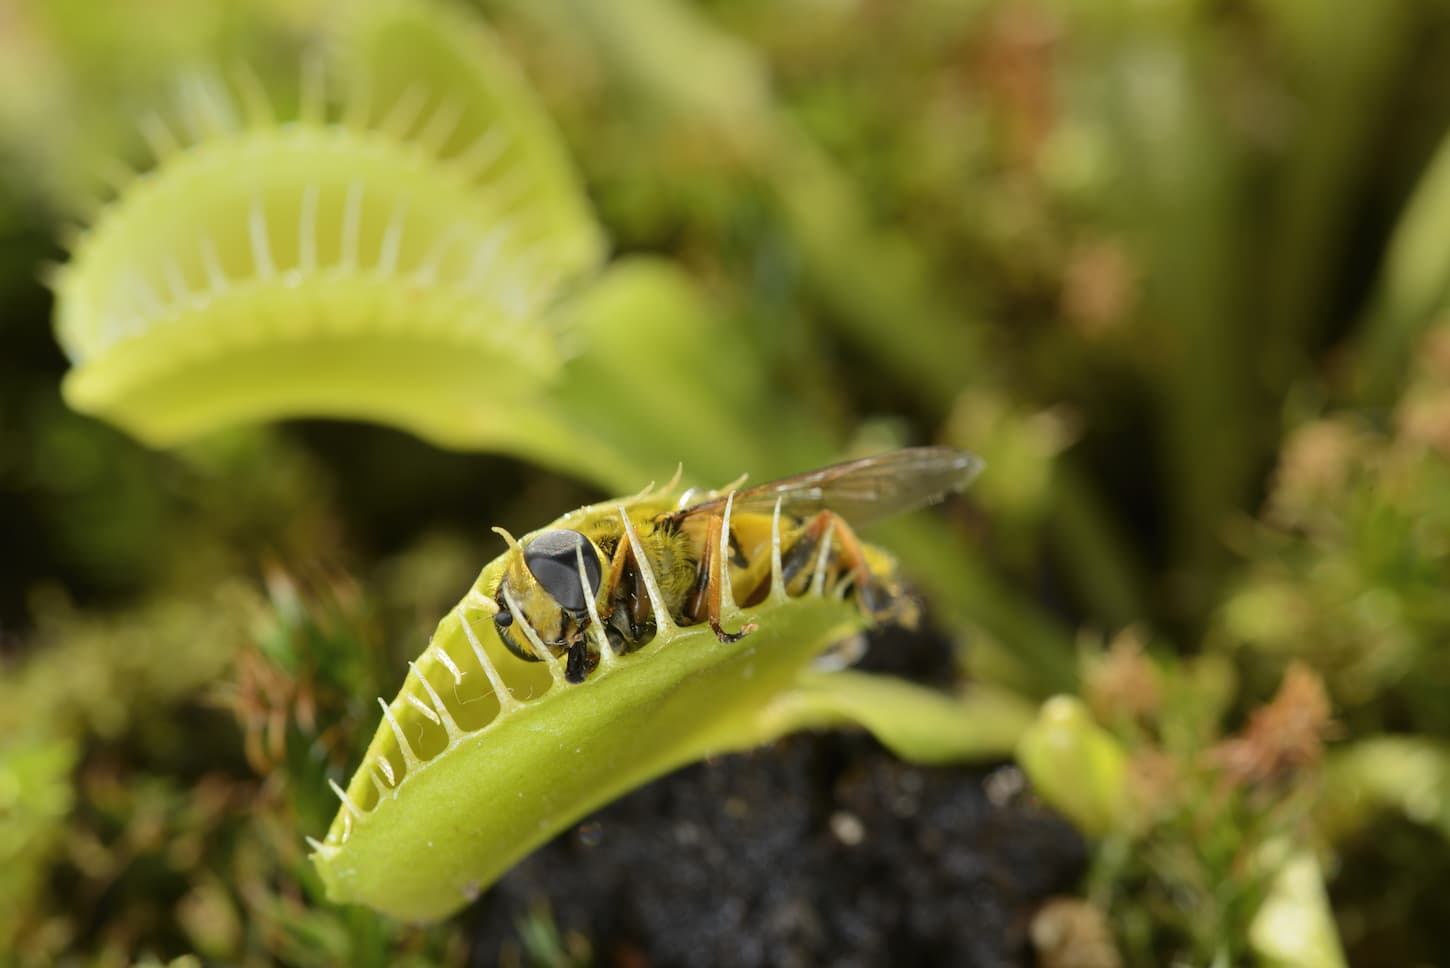 An image of a Bee-like fly insect approaching and being captured by Venus fly trap carnivorous plant.